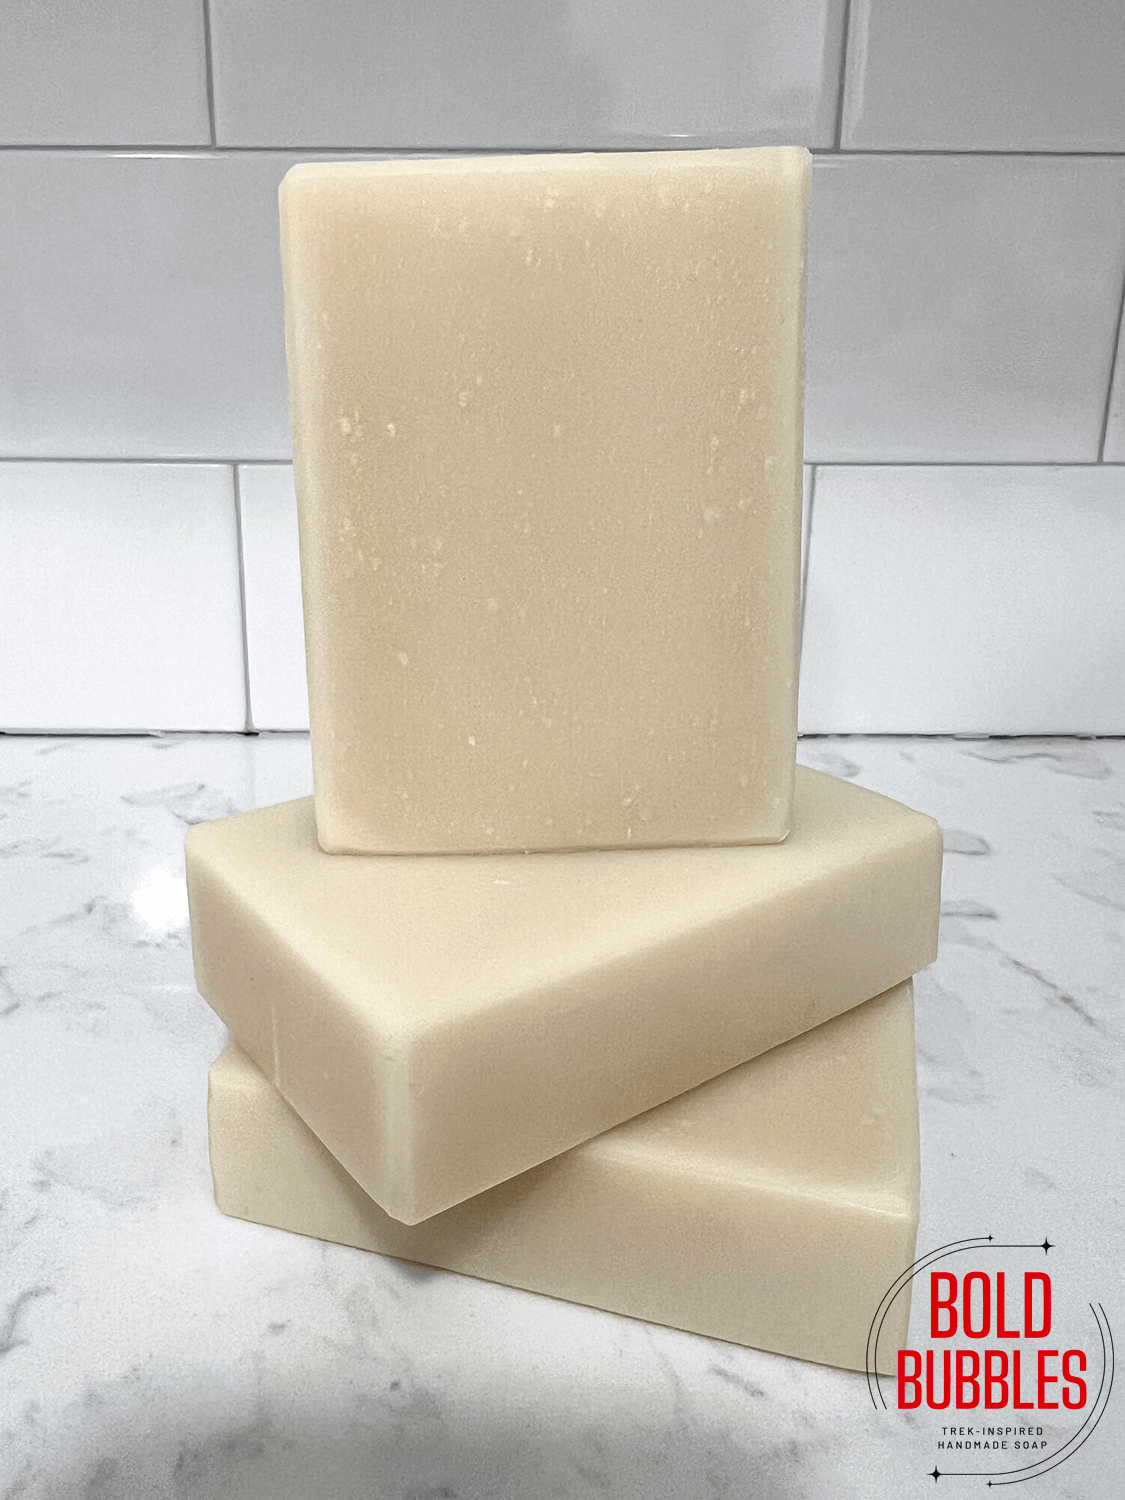 An ivory white bar of soap that is designed for sensitive skin. It does not contain fragrance or colorants, but does include colloidal oats. Colloidal oats help soothe dry and itchy skin.